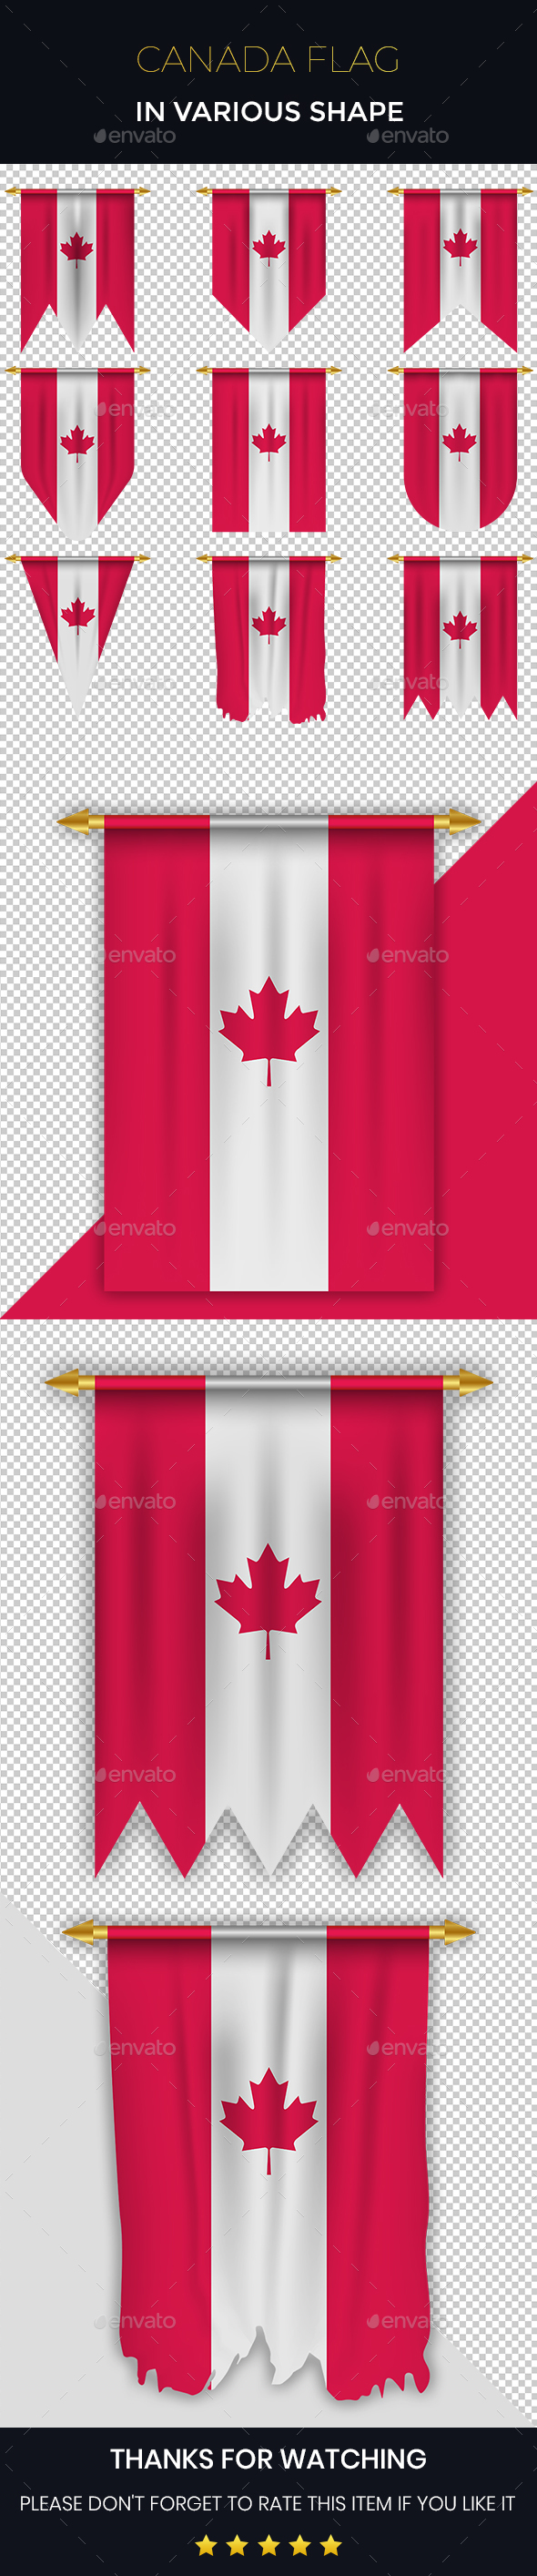 Canada Flag in Various Shapes